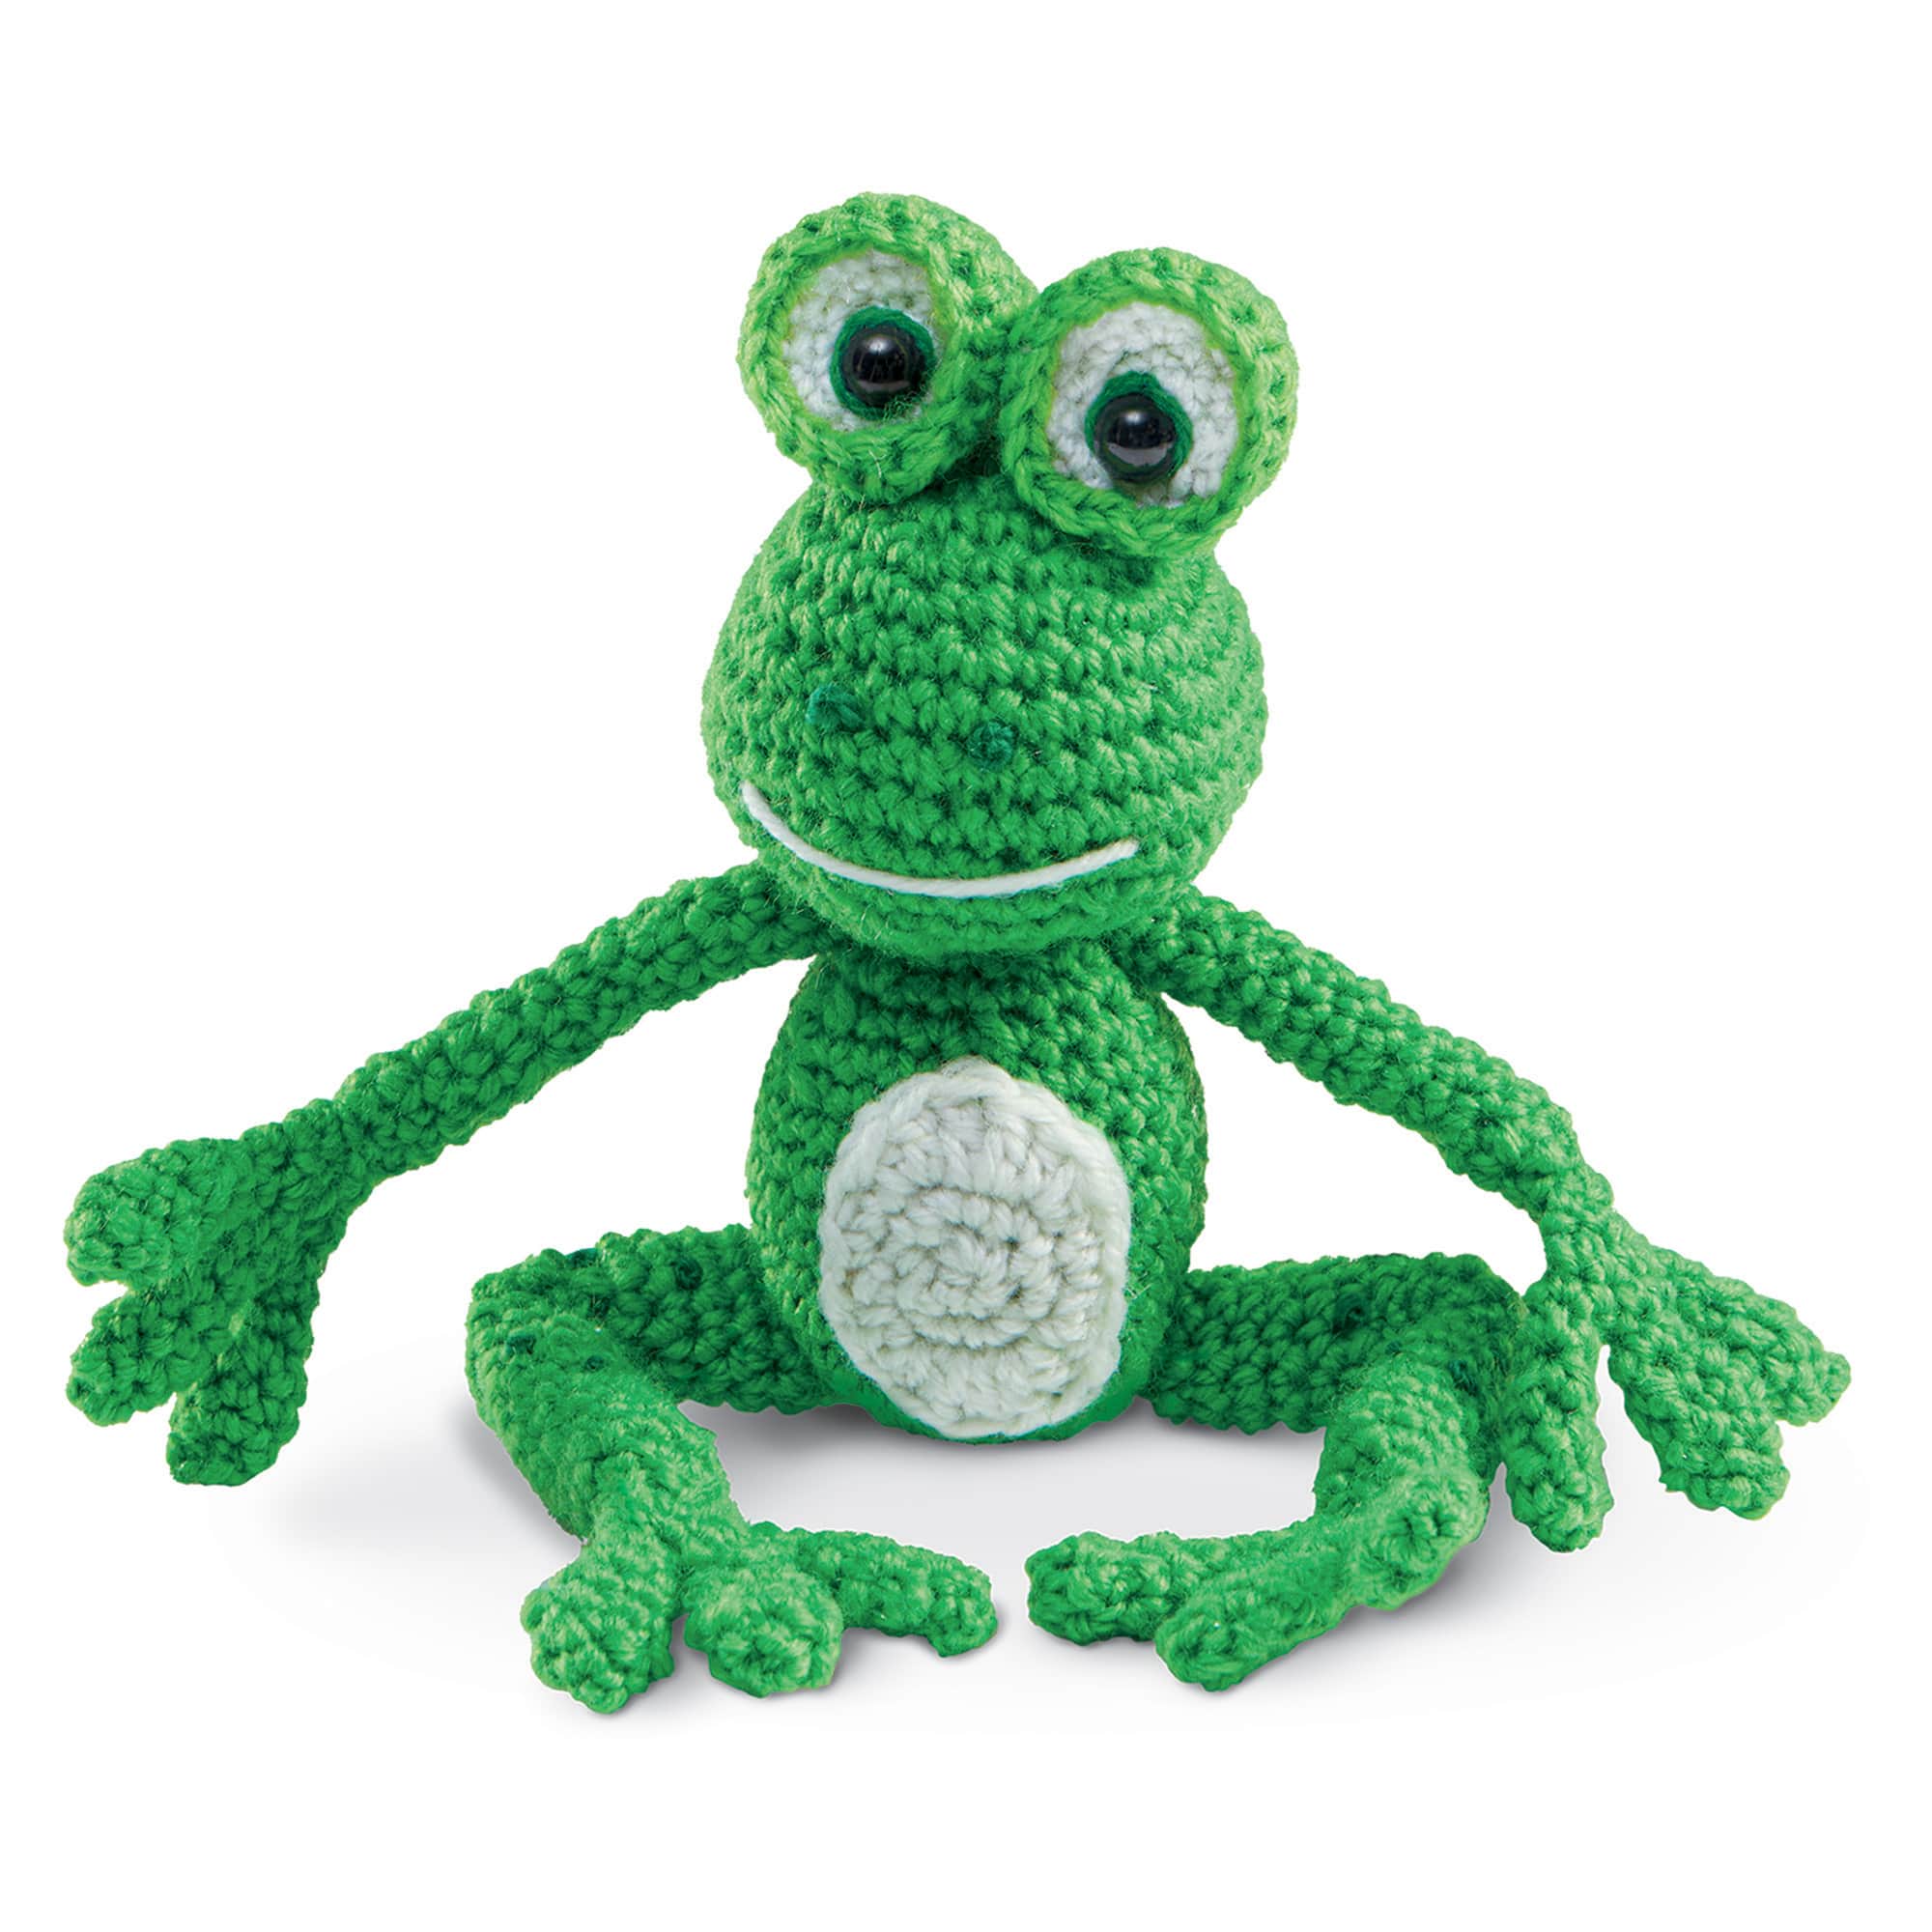 making soft frogs - how to make soft frog motifs from the original